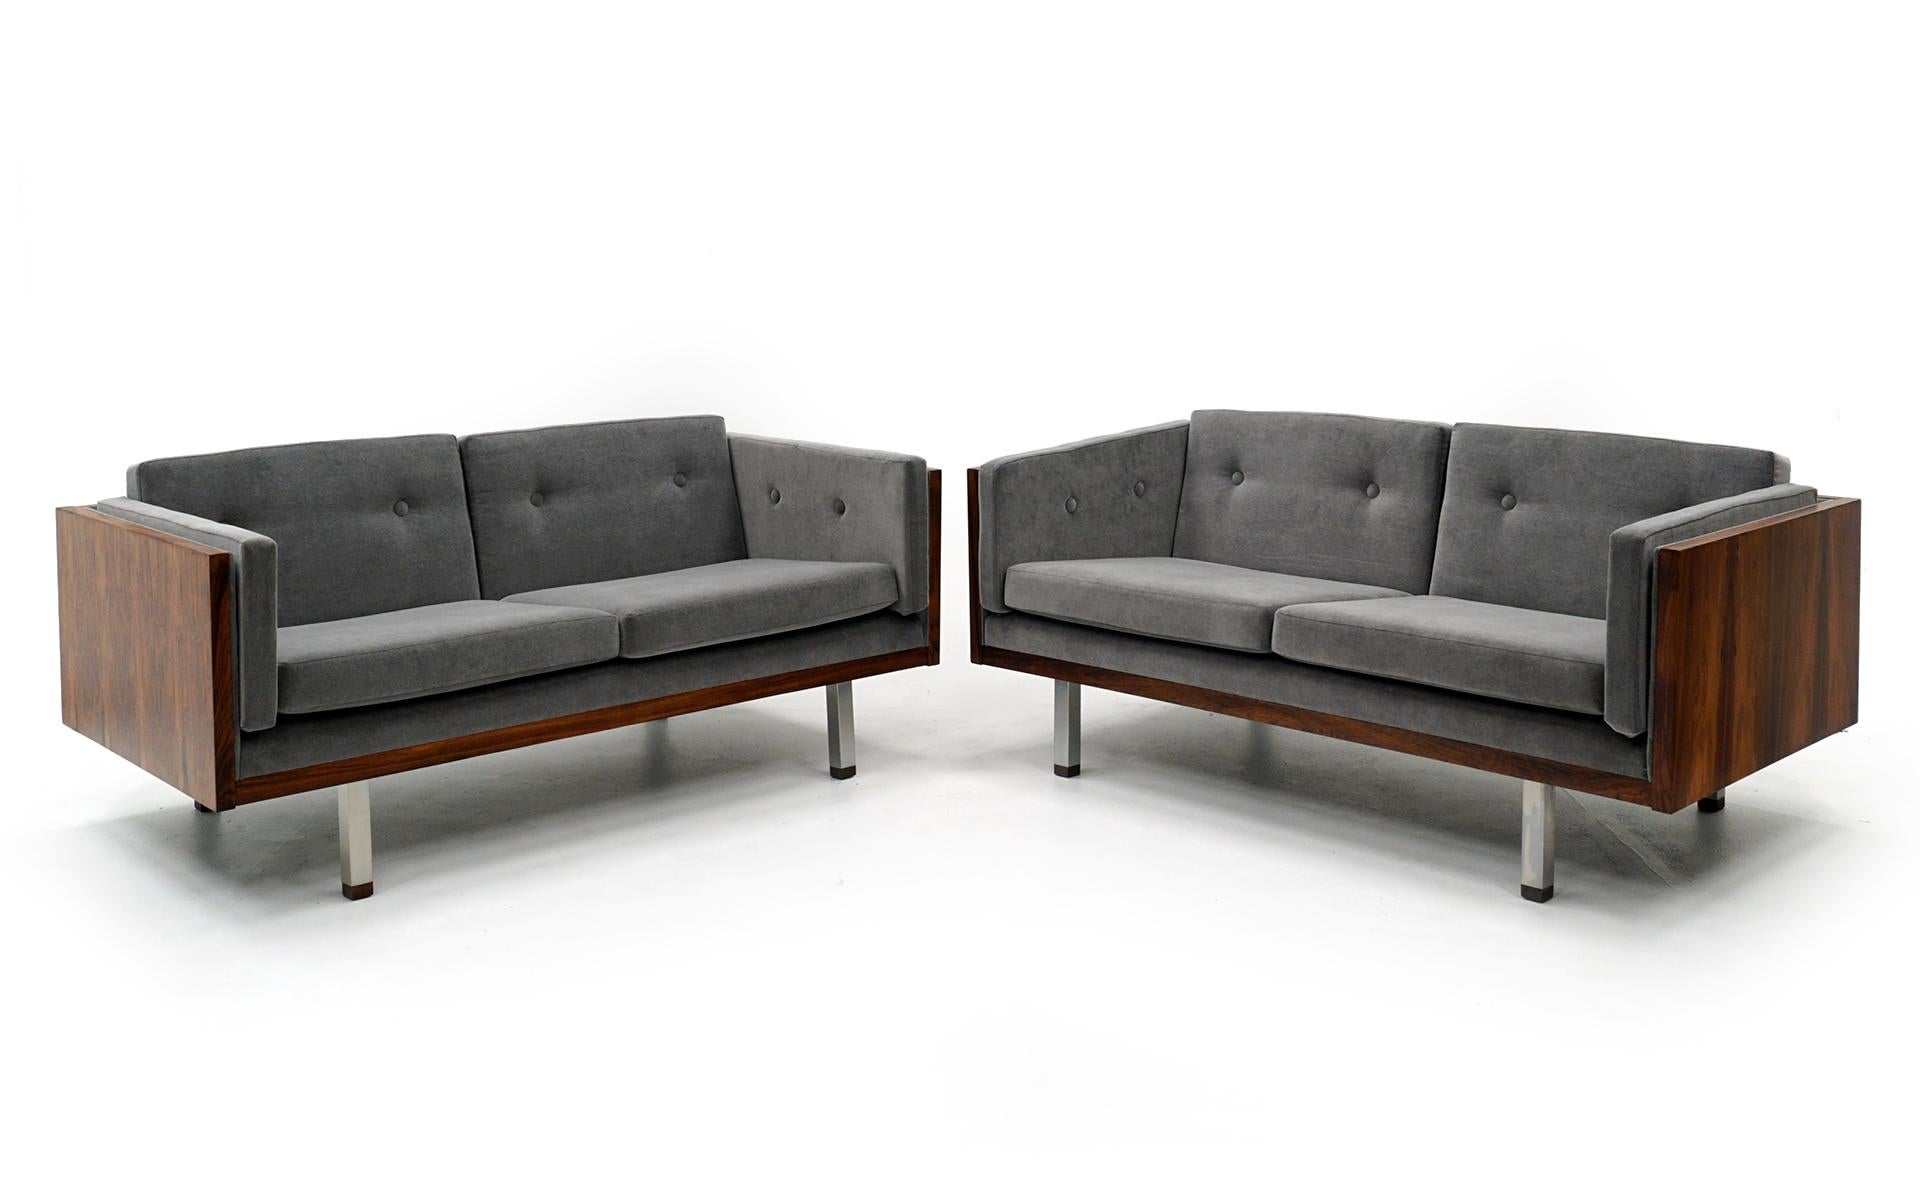 Set of two love seat / settees designed by Jydsk Mobelvaerk, Denmark, 1960. Stunning Brazilian rosewood with new grey velvet upholstery. Chrome legs with rosewood caps. These have both been expertly restored and refinished. As close to perfect as